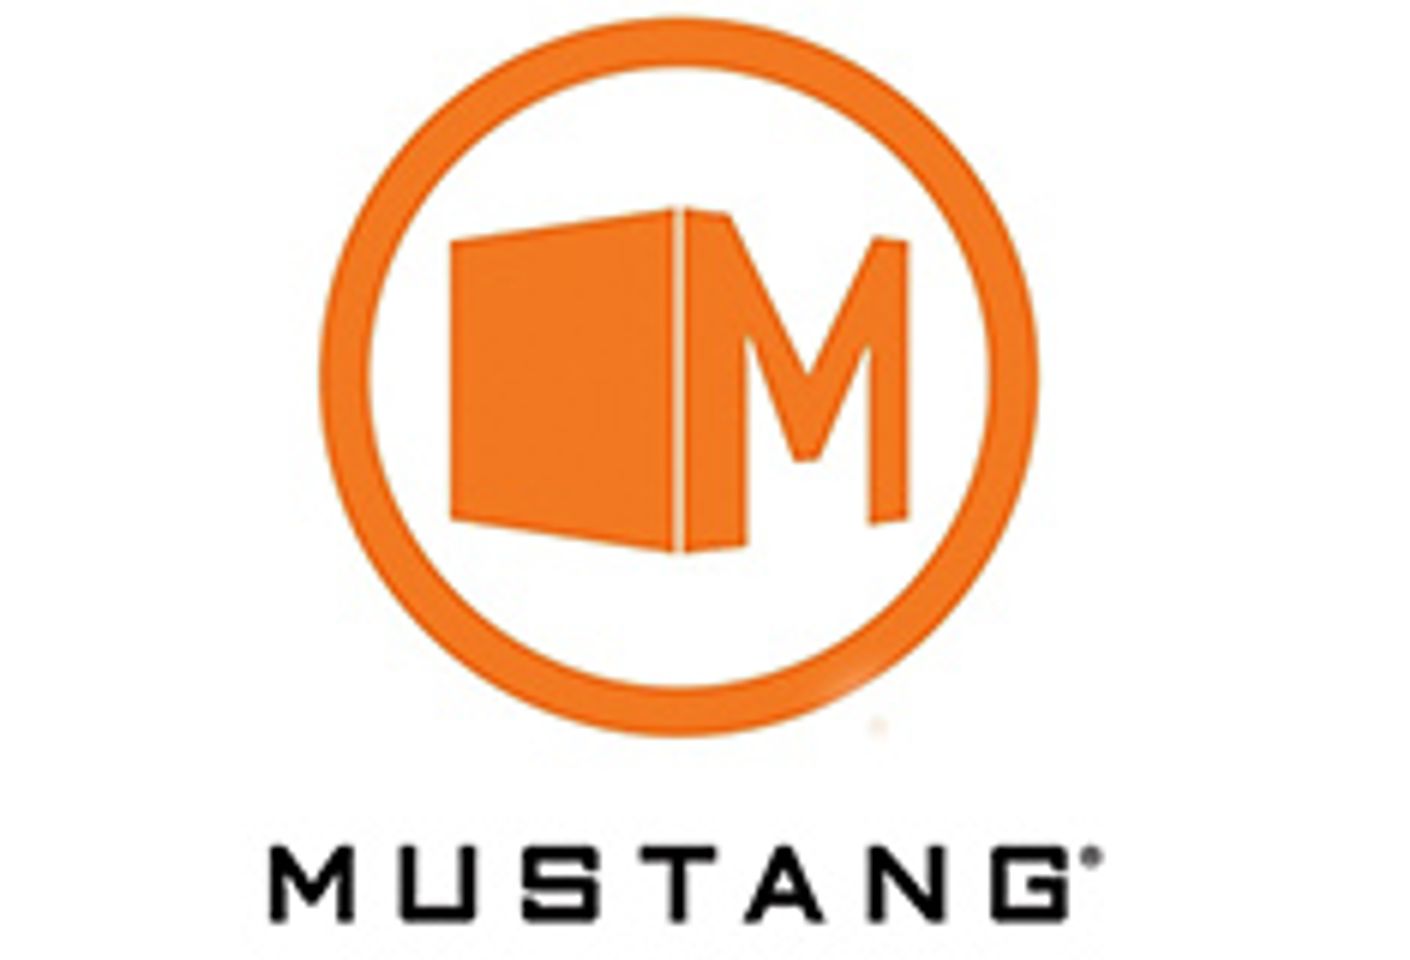 Mustang Studios Scenes Now Available on FalconTV.com